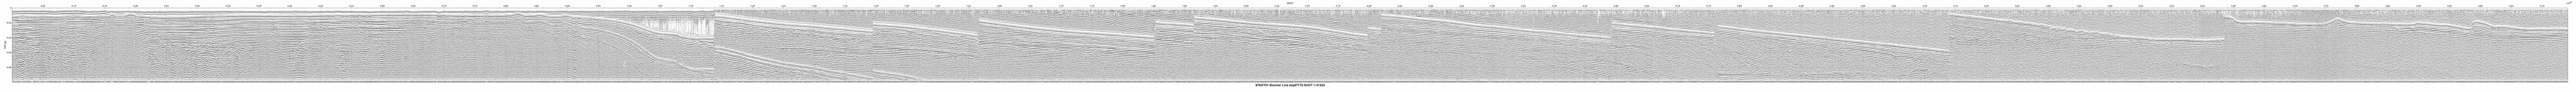 Thumbnail GIF image of the seismic trackline key9717b, with a hotlink to the more detailed, larger JPG image.